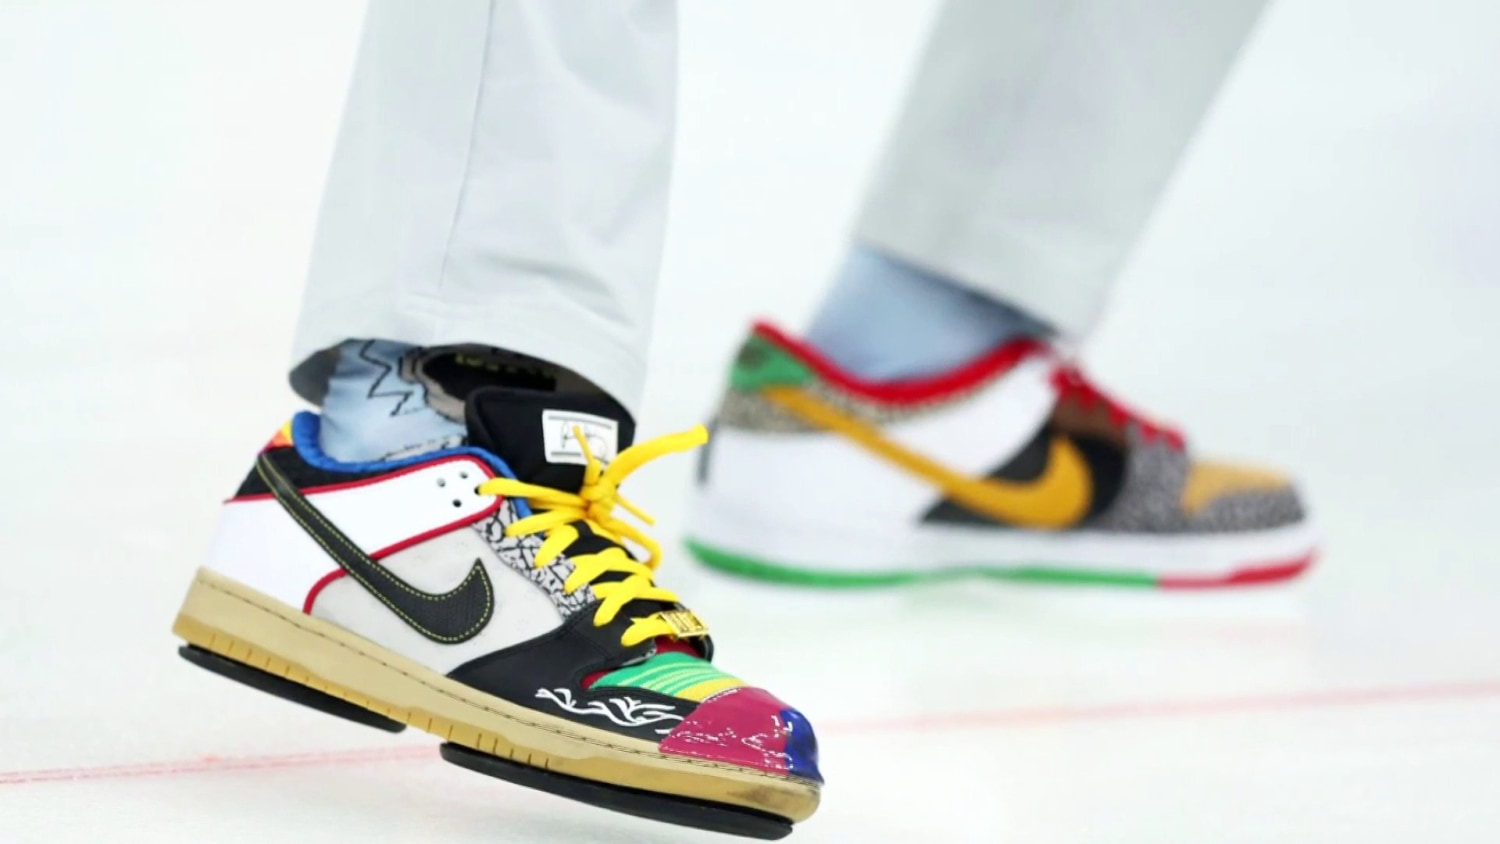 American curler Matt Hamilton's shoes stand out at Olympics - WTOP